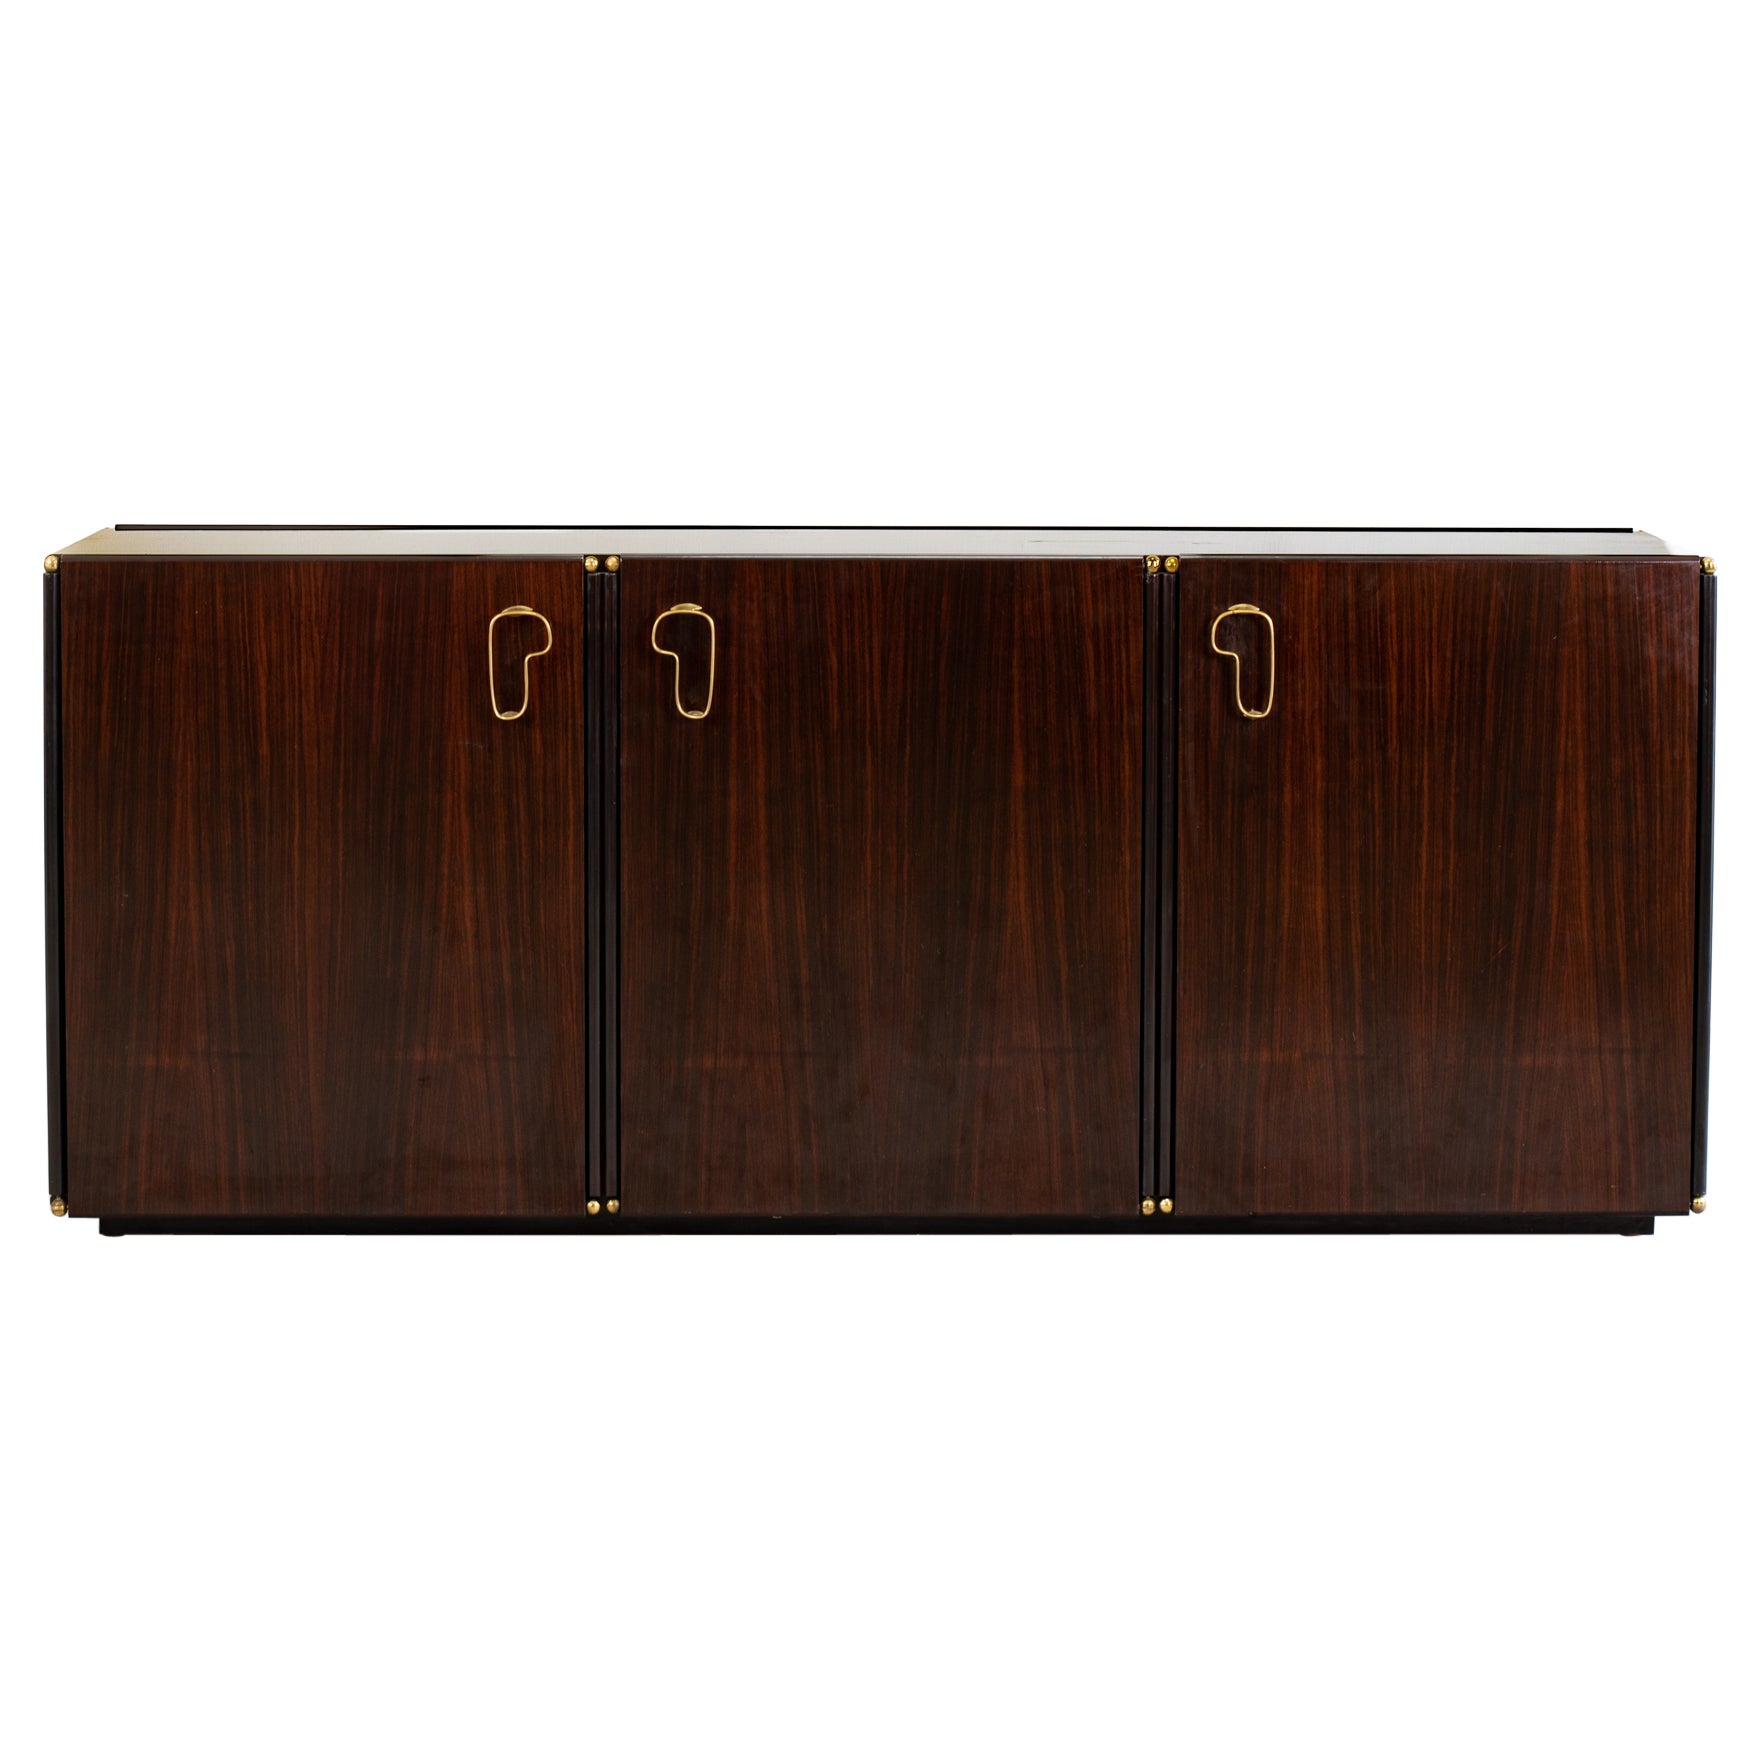 Midcentury Rosewood Sideboard, Italian Manufacture, 1950s For Sale